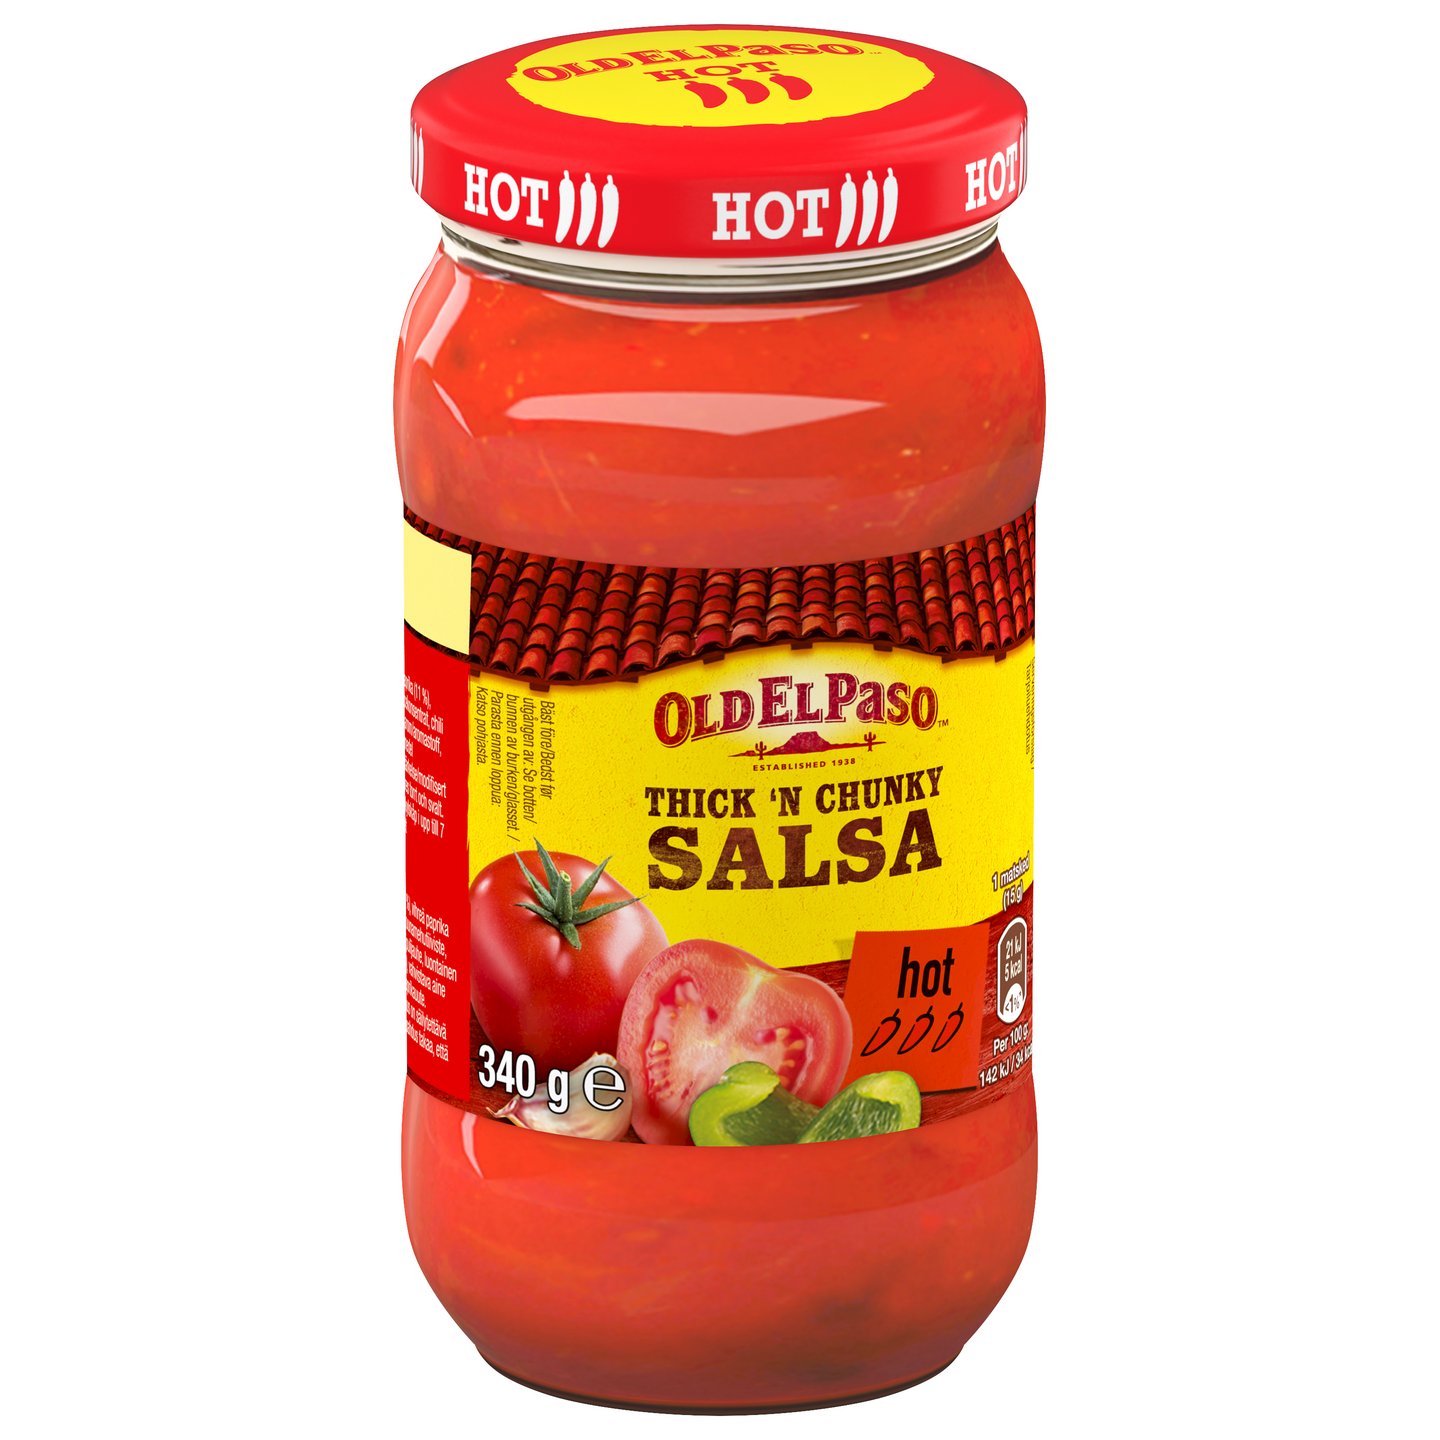 Old El Paso Thick and Chunky Original Salsa 340g Hot